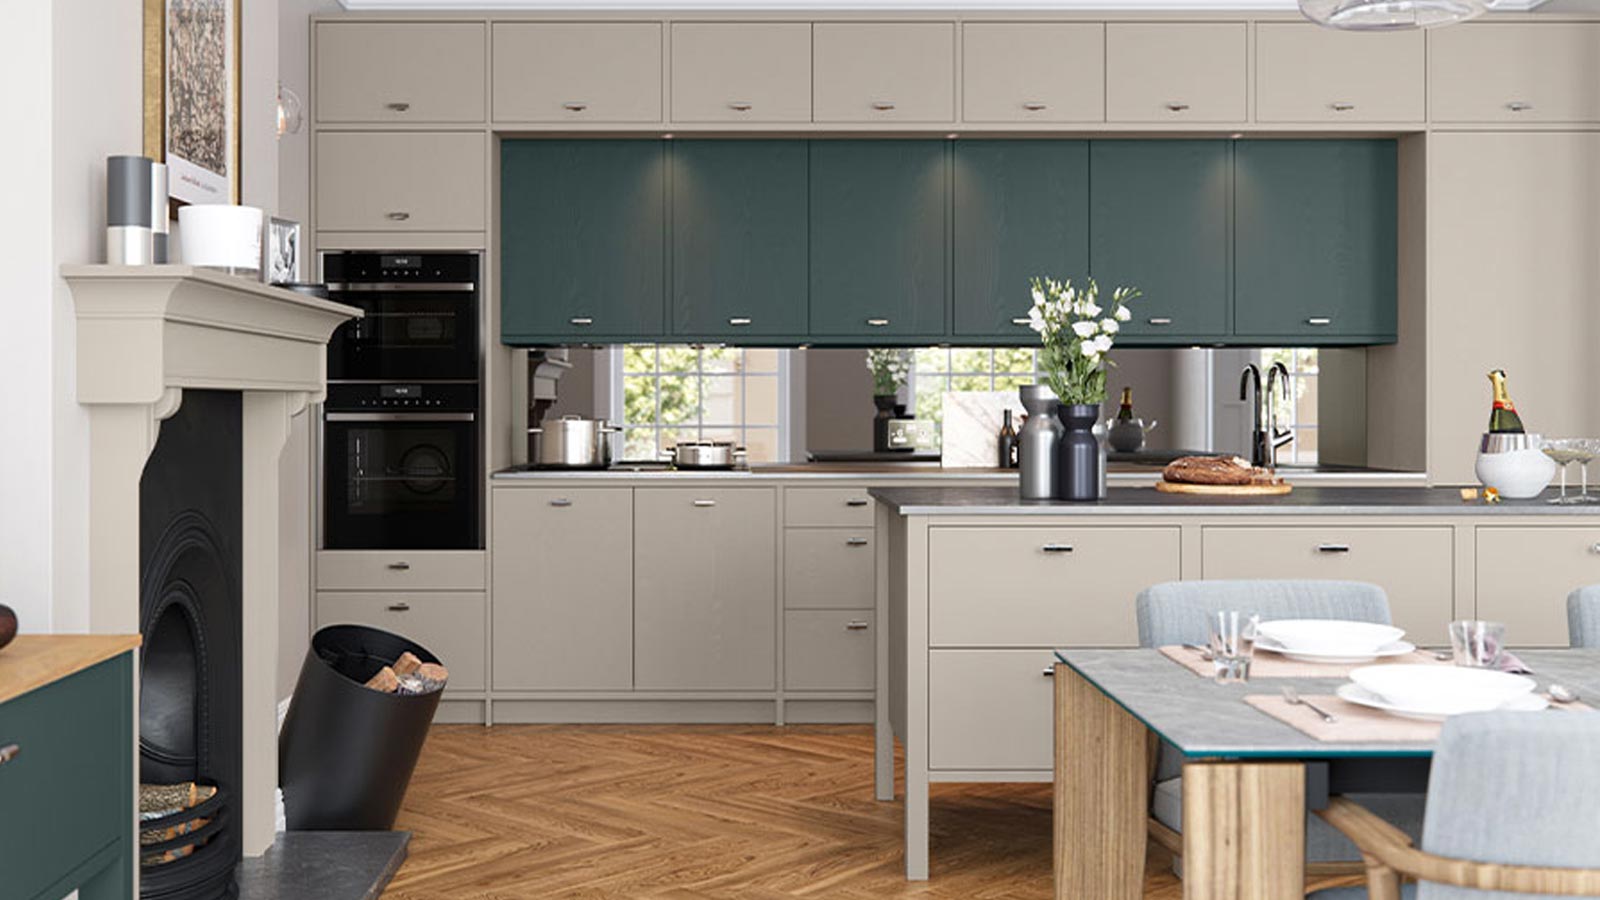 A light grey and dark green painted Oxwich kitchen with t handles